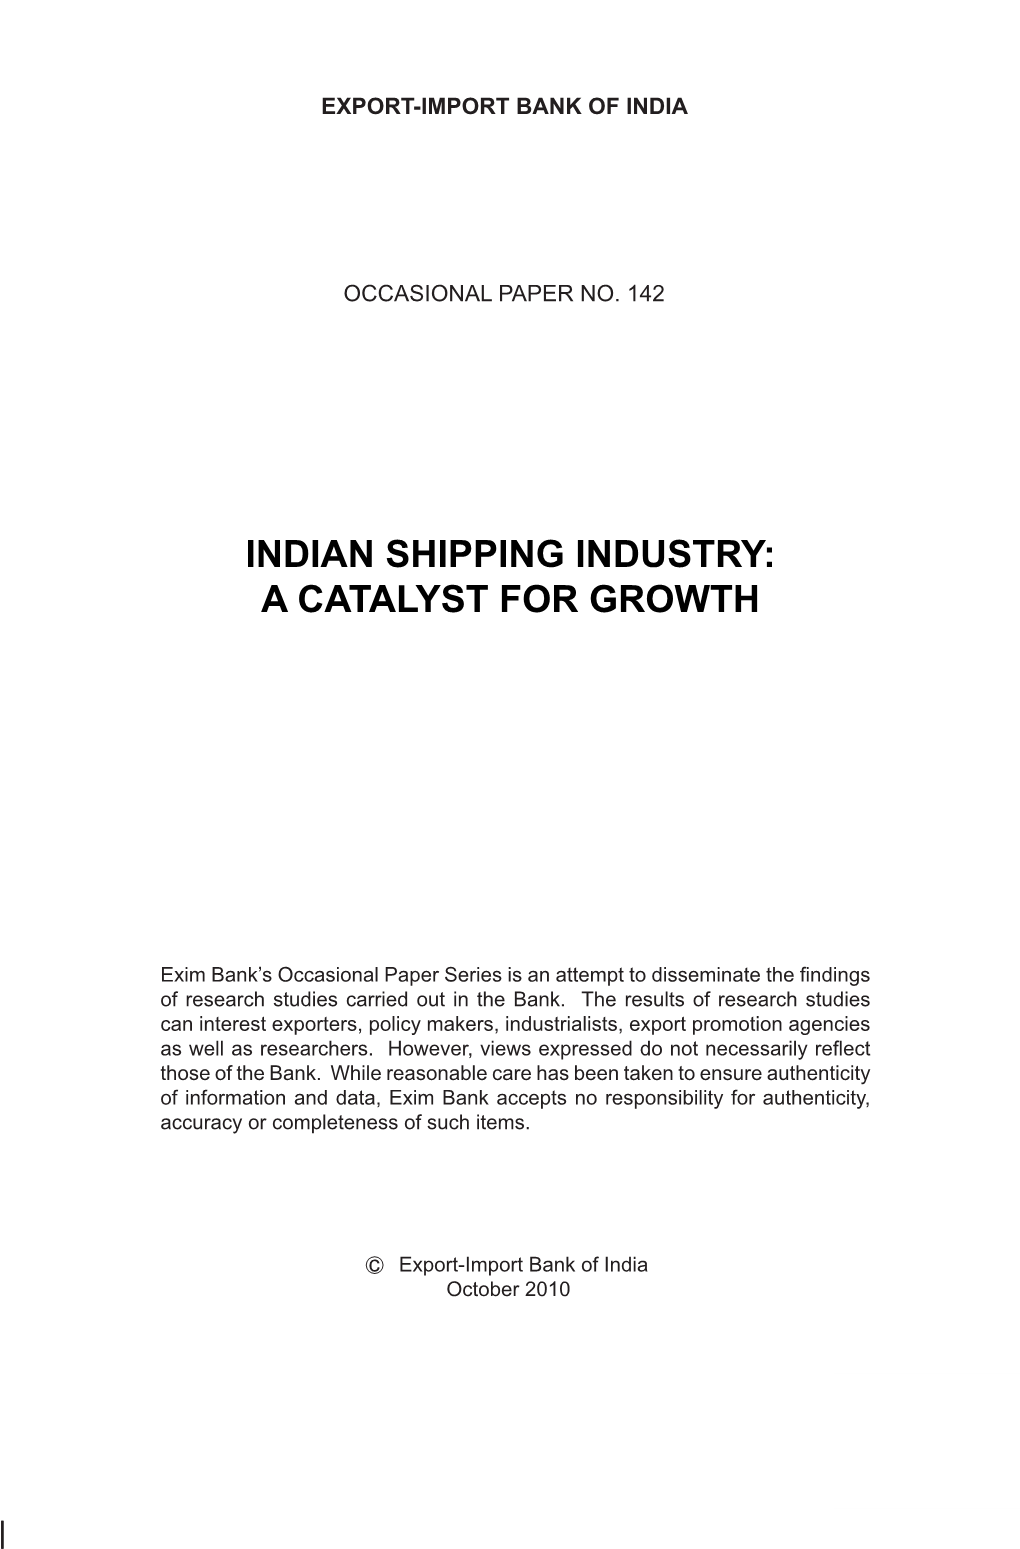 Indian Shipping Industry: a Catalyst for Growth